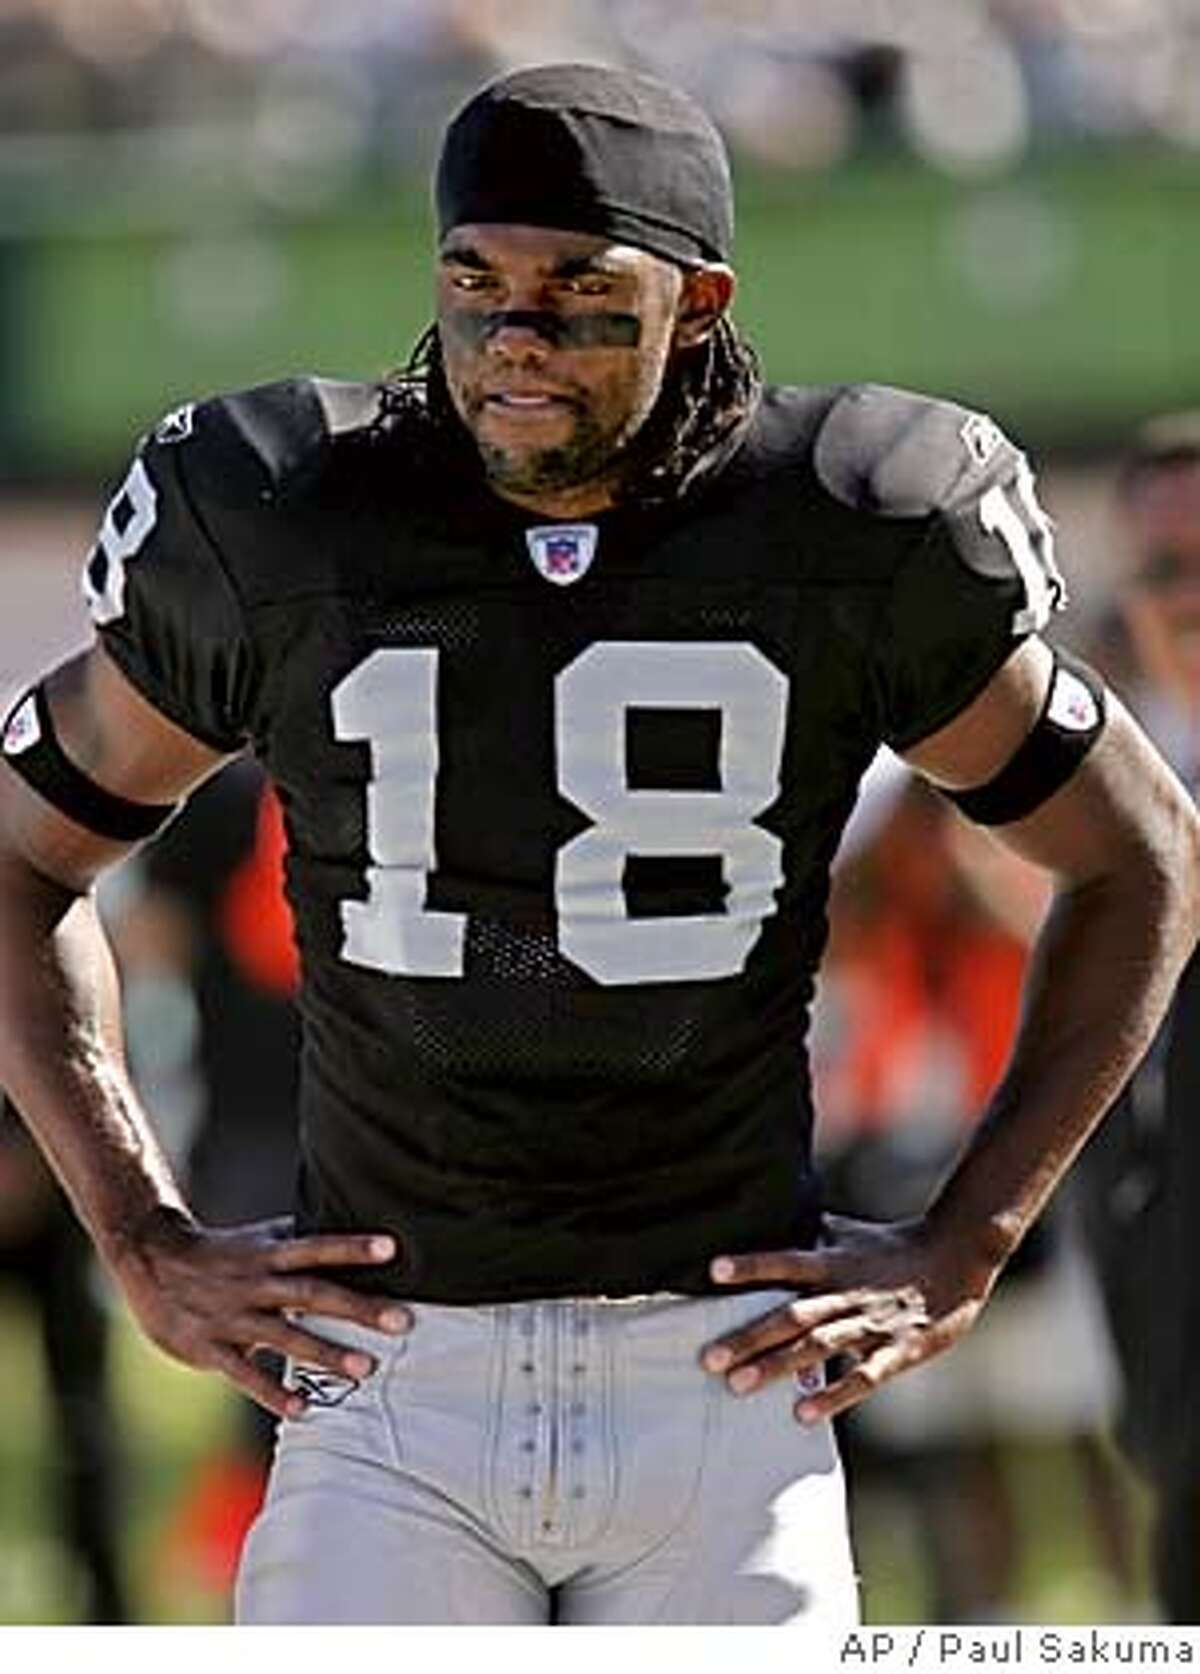 Oakland Raiders wide receiver Randy Moss grimaces on the sidelinies after injuring his groin in the first quarter against the San Diego Chargers, Sunday, Oct. 16, 2005 in Oakland, Calif. The Raiders lost to the Chargers 27-14. (AP Photo/Paul Sakuma) Ran on: 10-18-2005 Randy Moss is averaging an NFL-best 24.5 yards per reception. Ran on: 10-18-2005 Medicare Web site test at senior center Ran on: 10-18-2005 Randy Moss is averaging an NFL-best 24.5 yards per reception.